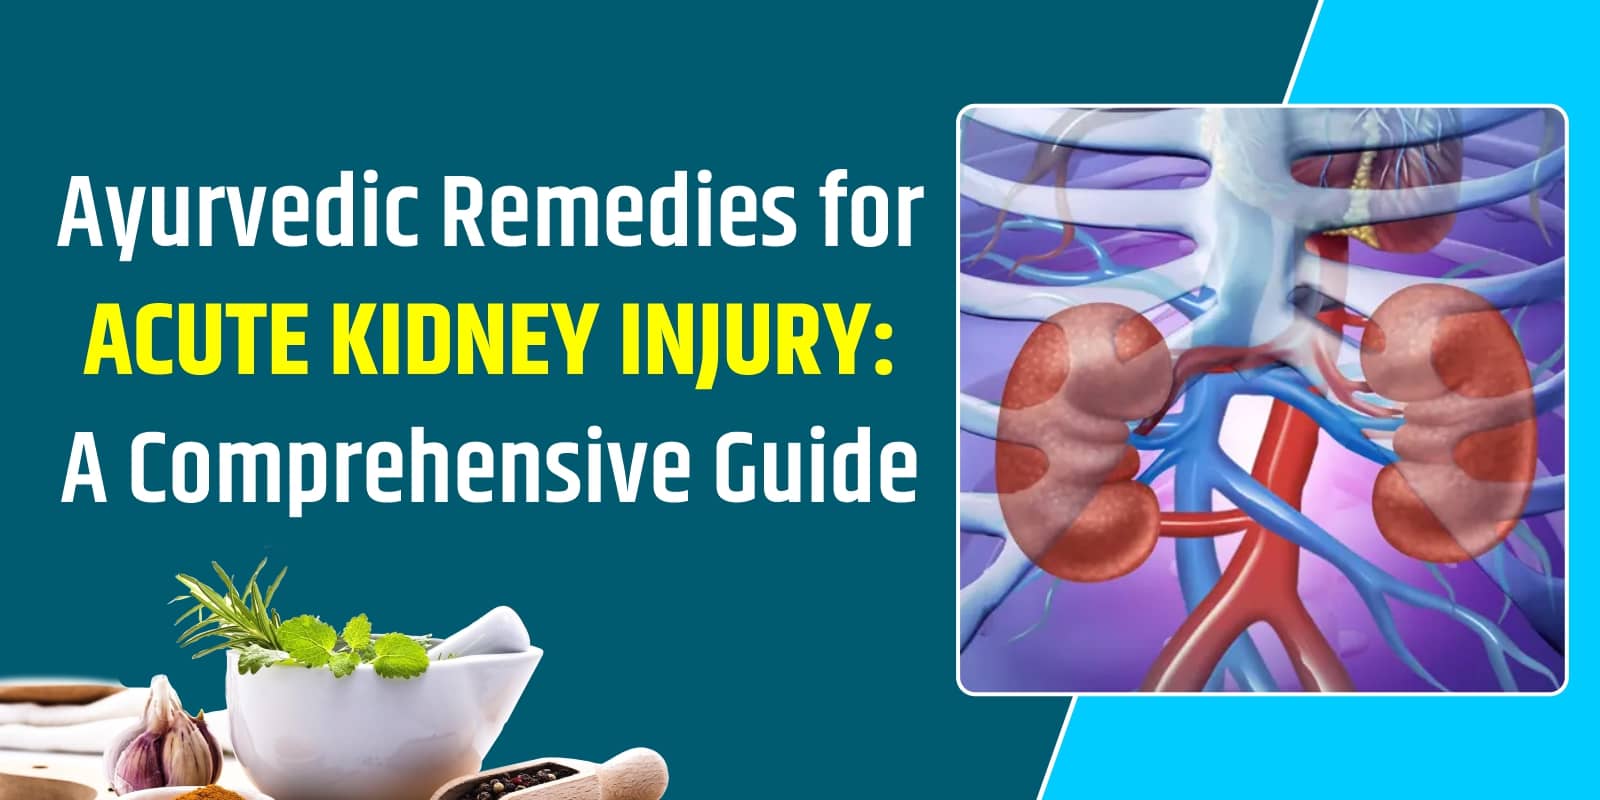 Ayurvedic Remedies for Acute Kidney Injury: A Comprehensive Guide